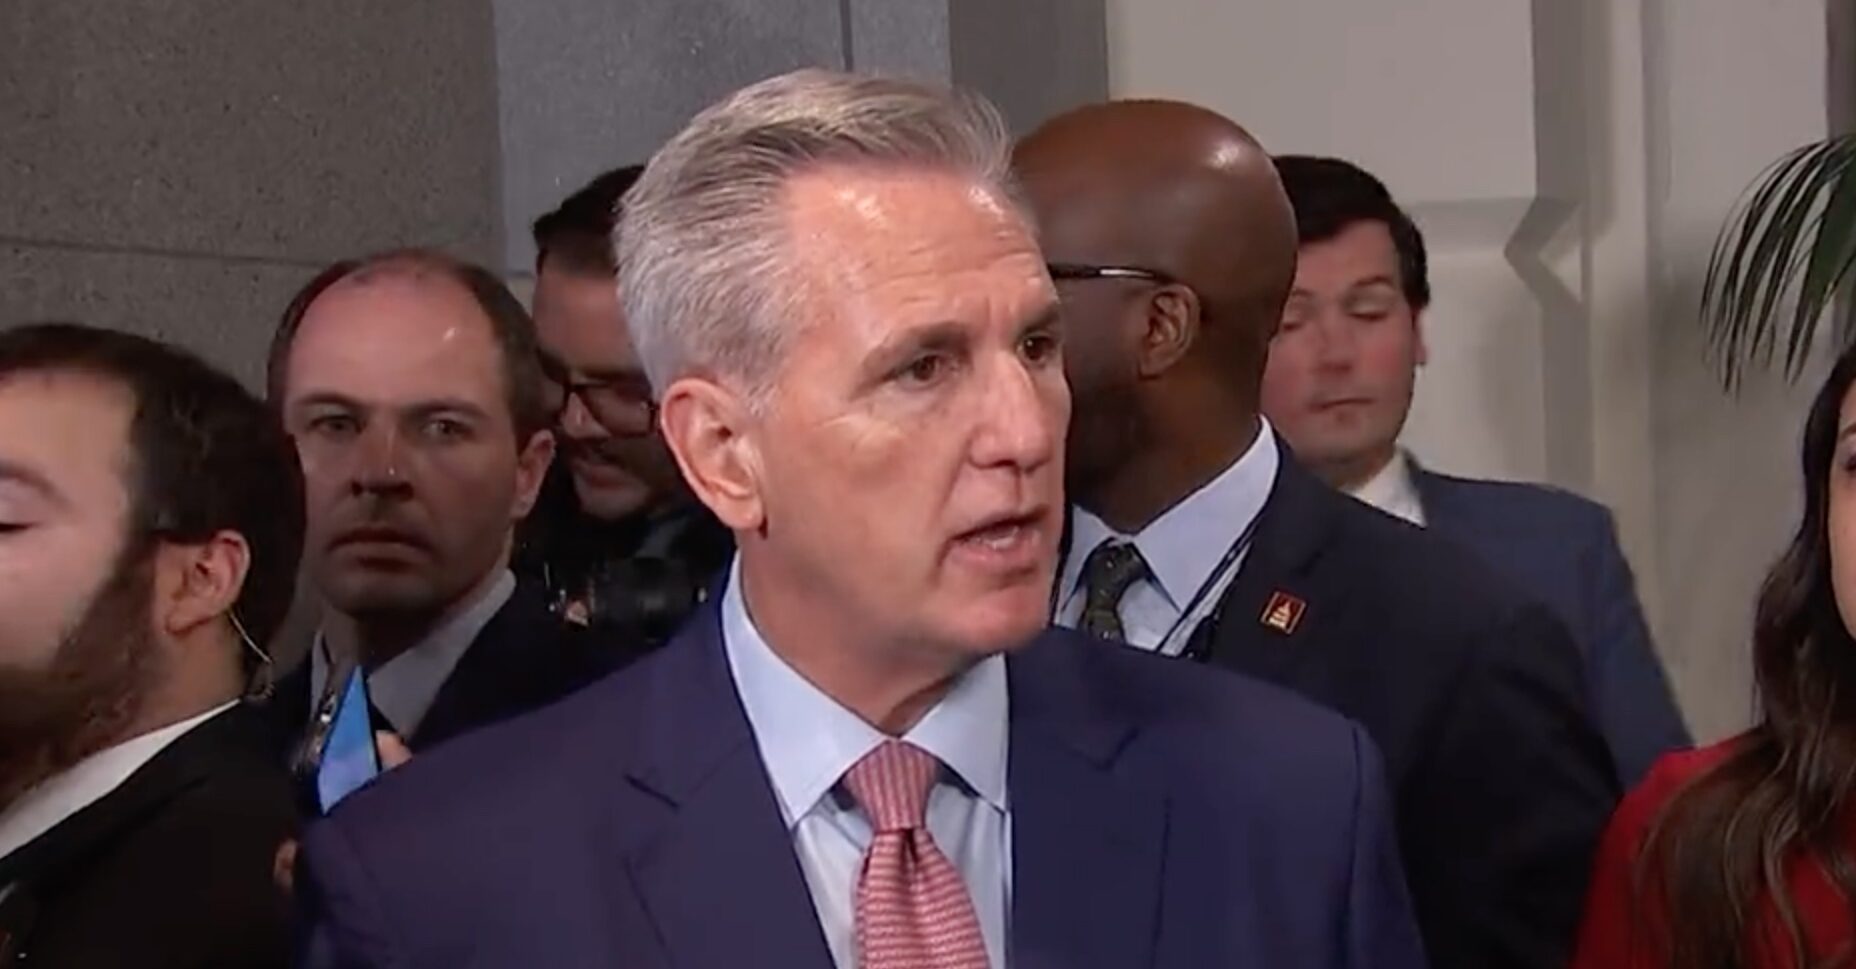 Kevin McCarthy Comes Up Short on 14th Speaker Vote, Prevails on 15th Ballot